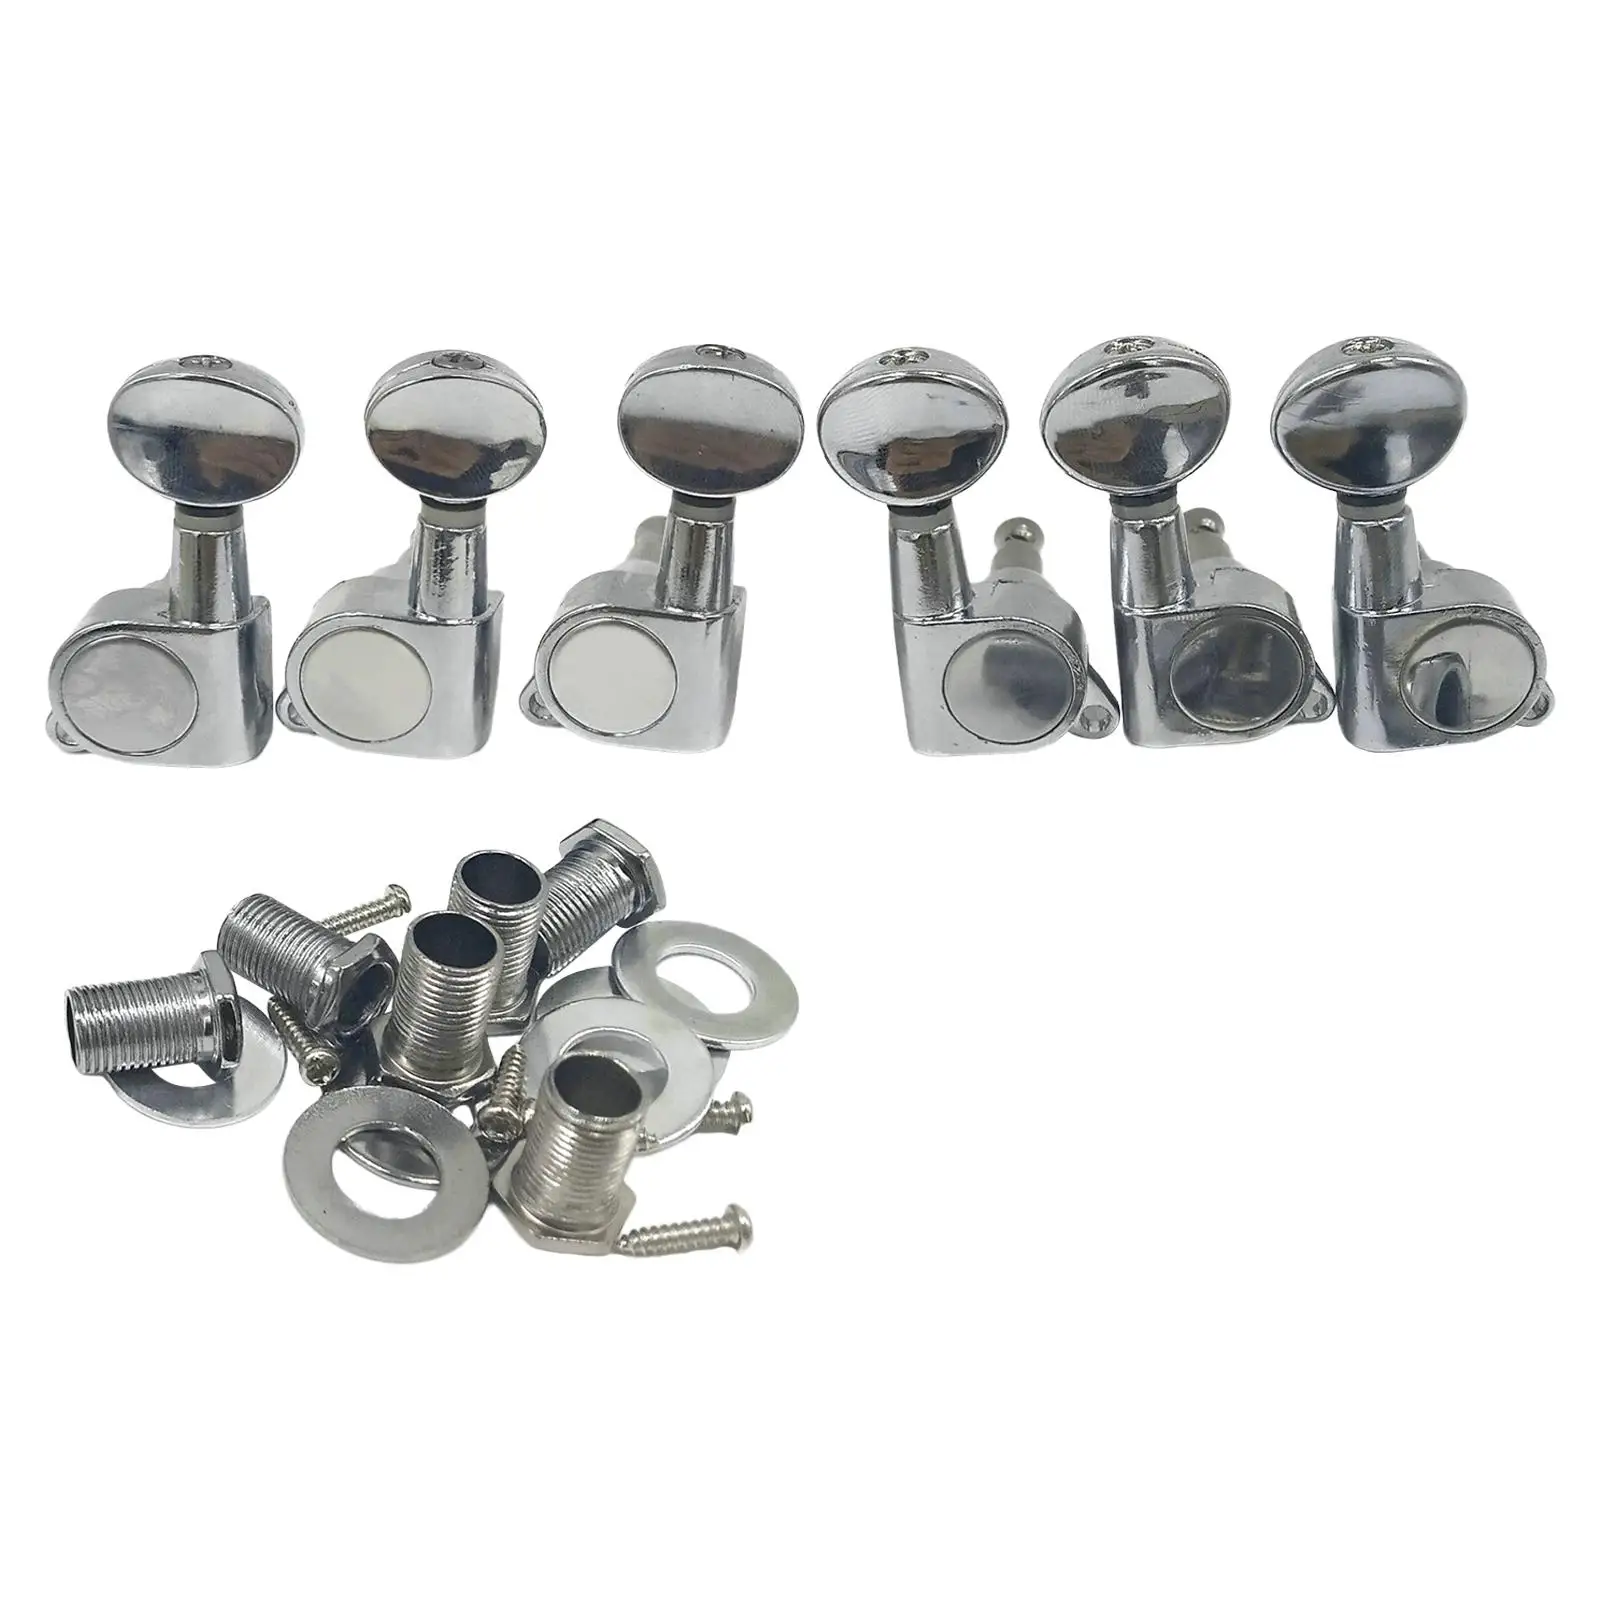 6x Zinc Alloy Guitar 3L 3R Sealed String Button Tuning Pegs Key Peg Knobs Tuners for Acoustic Electric Guitar Accessories